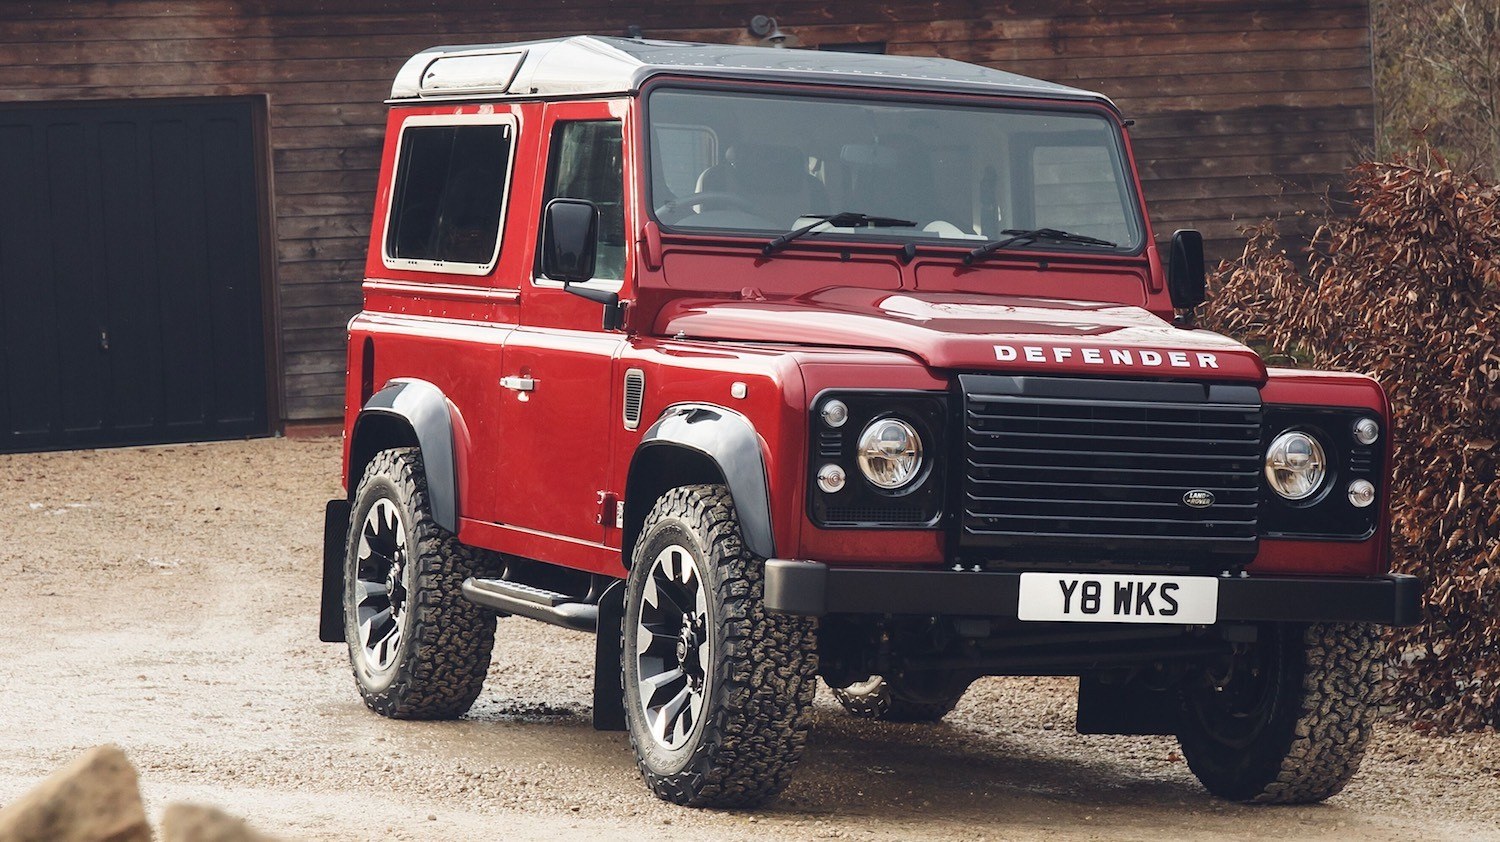 The latest 70th Edition Defender for the JPR 2018 70th Anniversary Celebrations 22